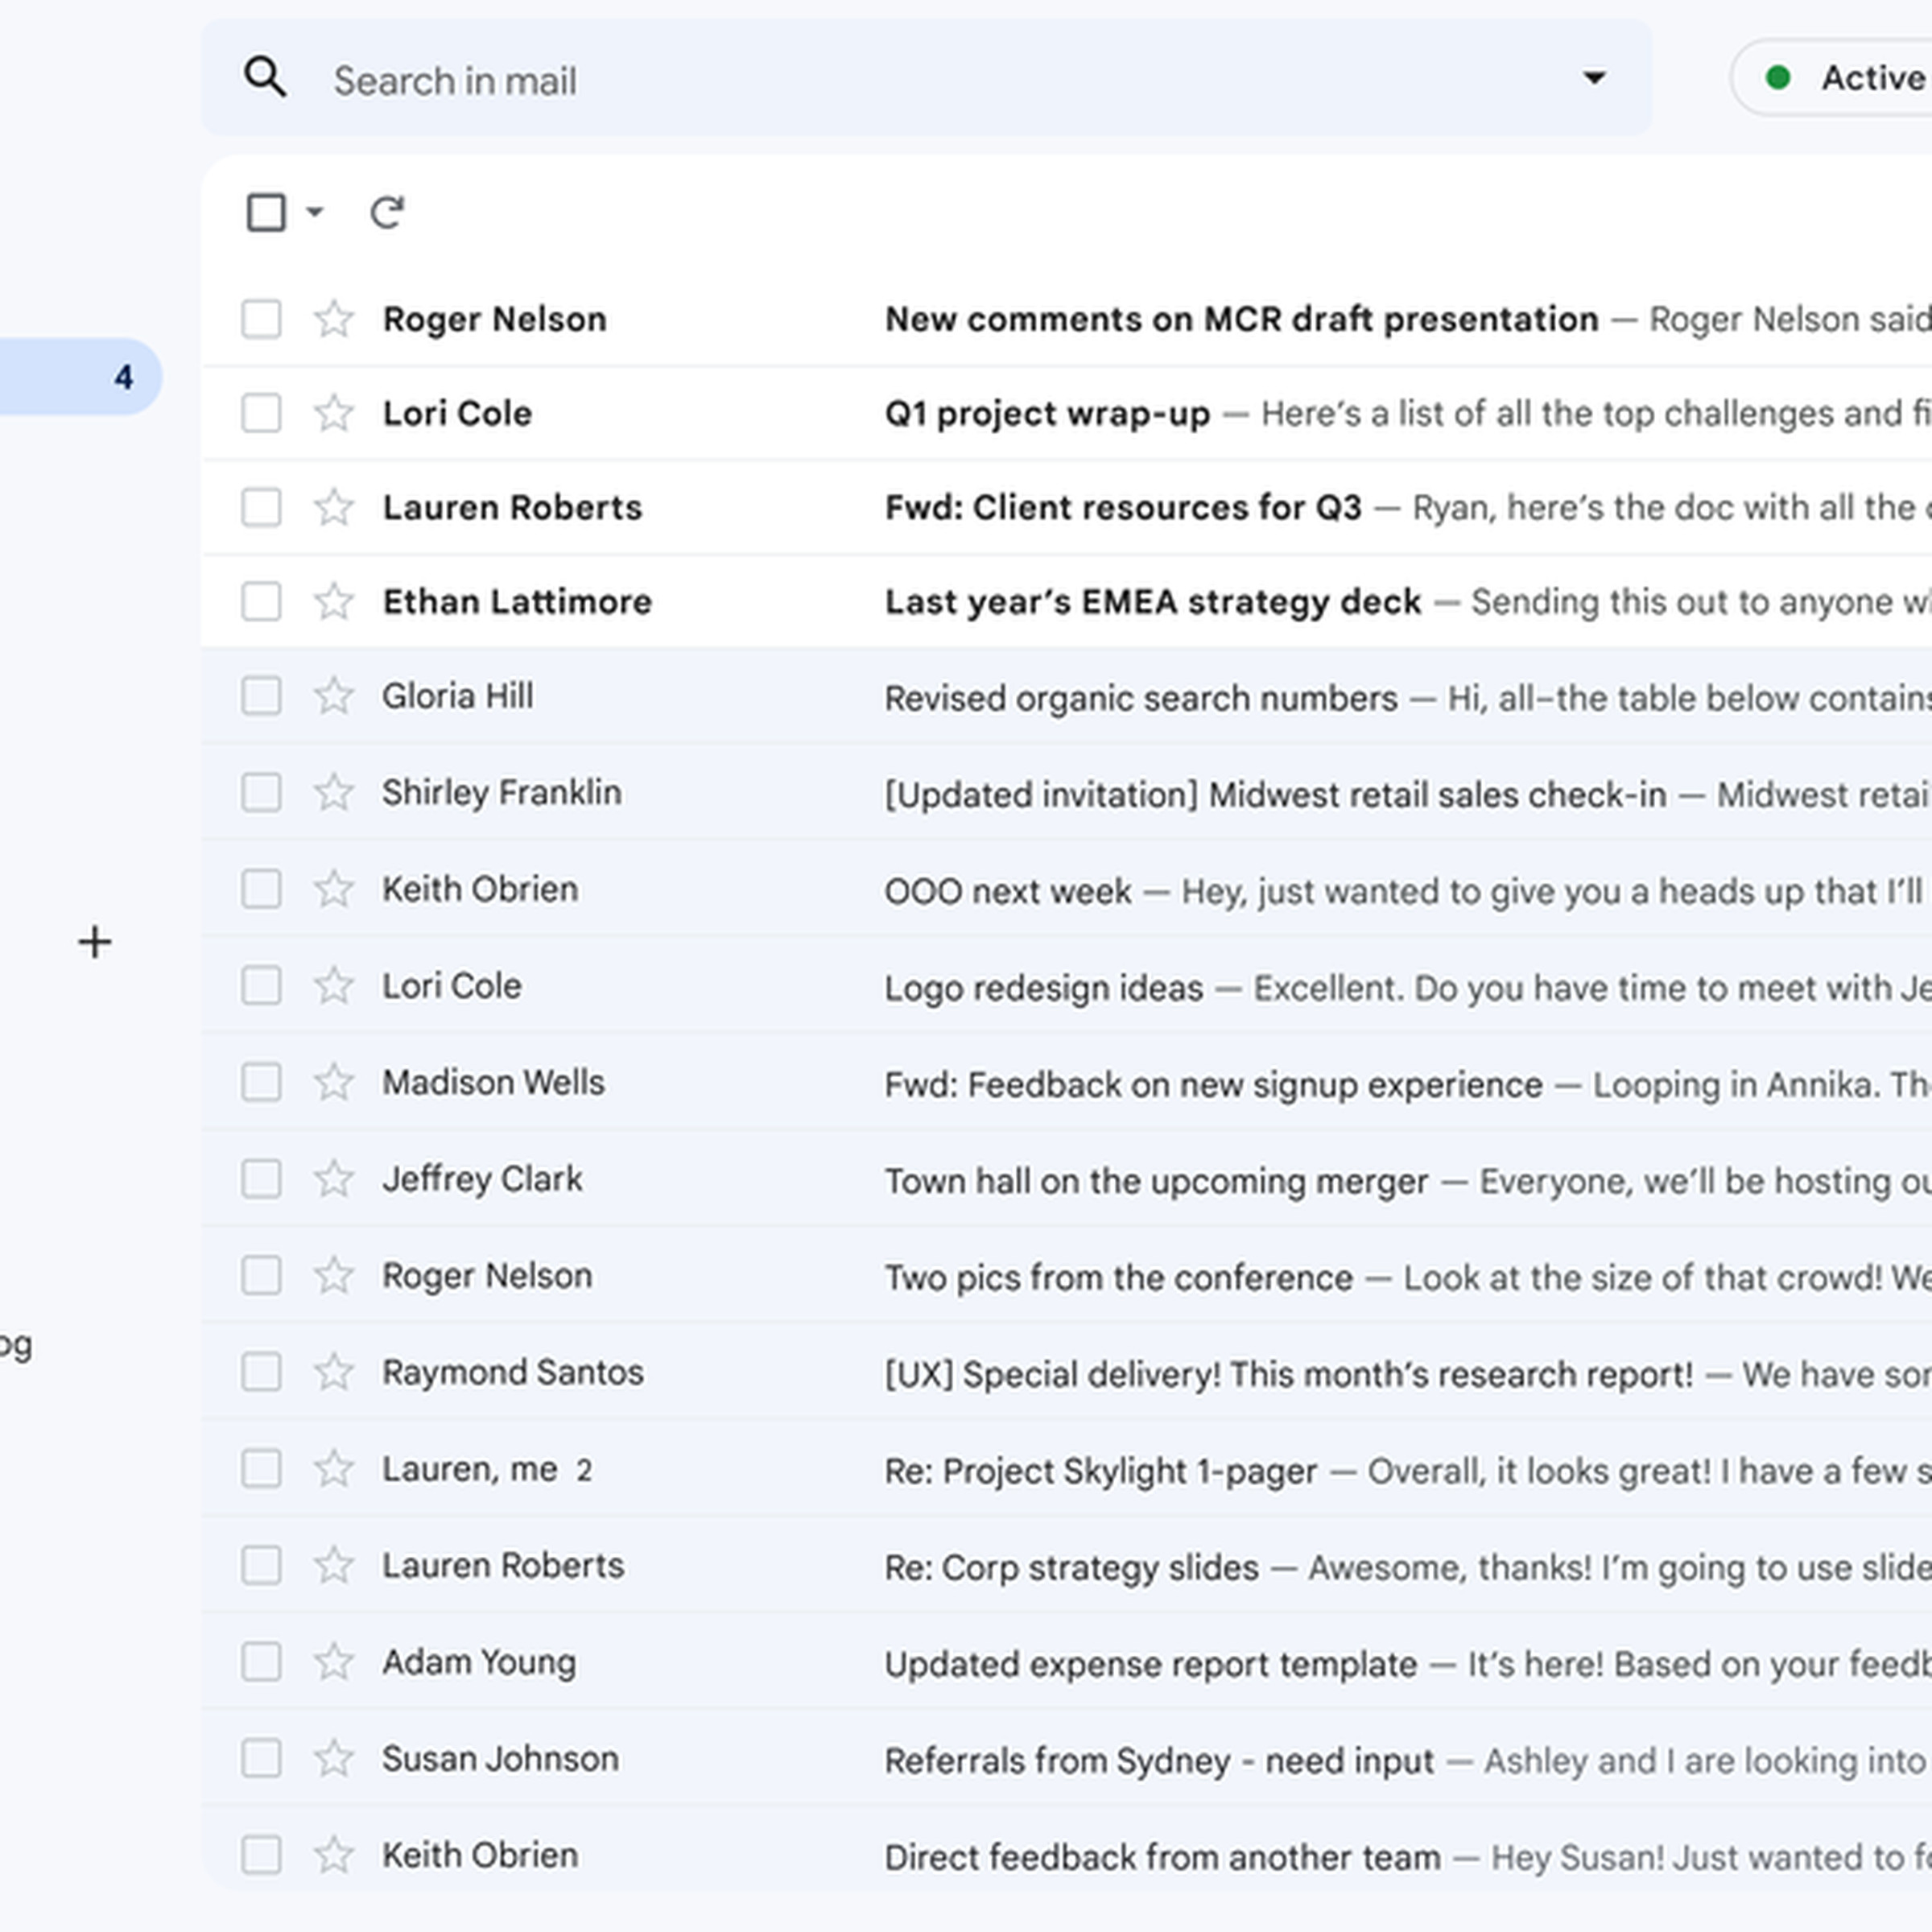 Gmail’s new integrated view